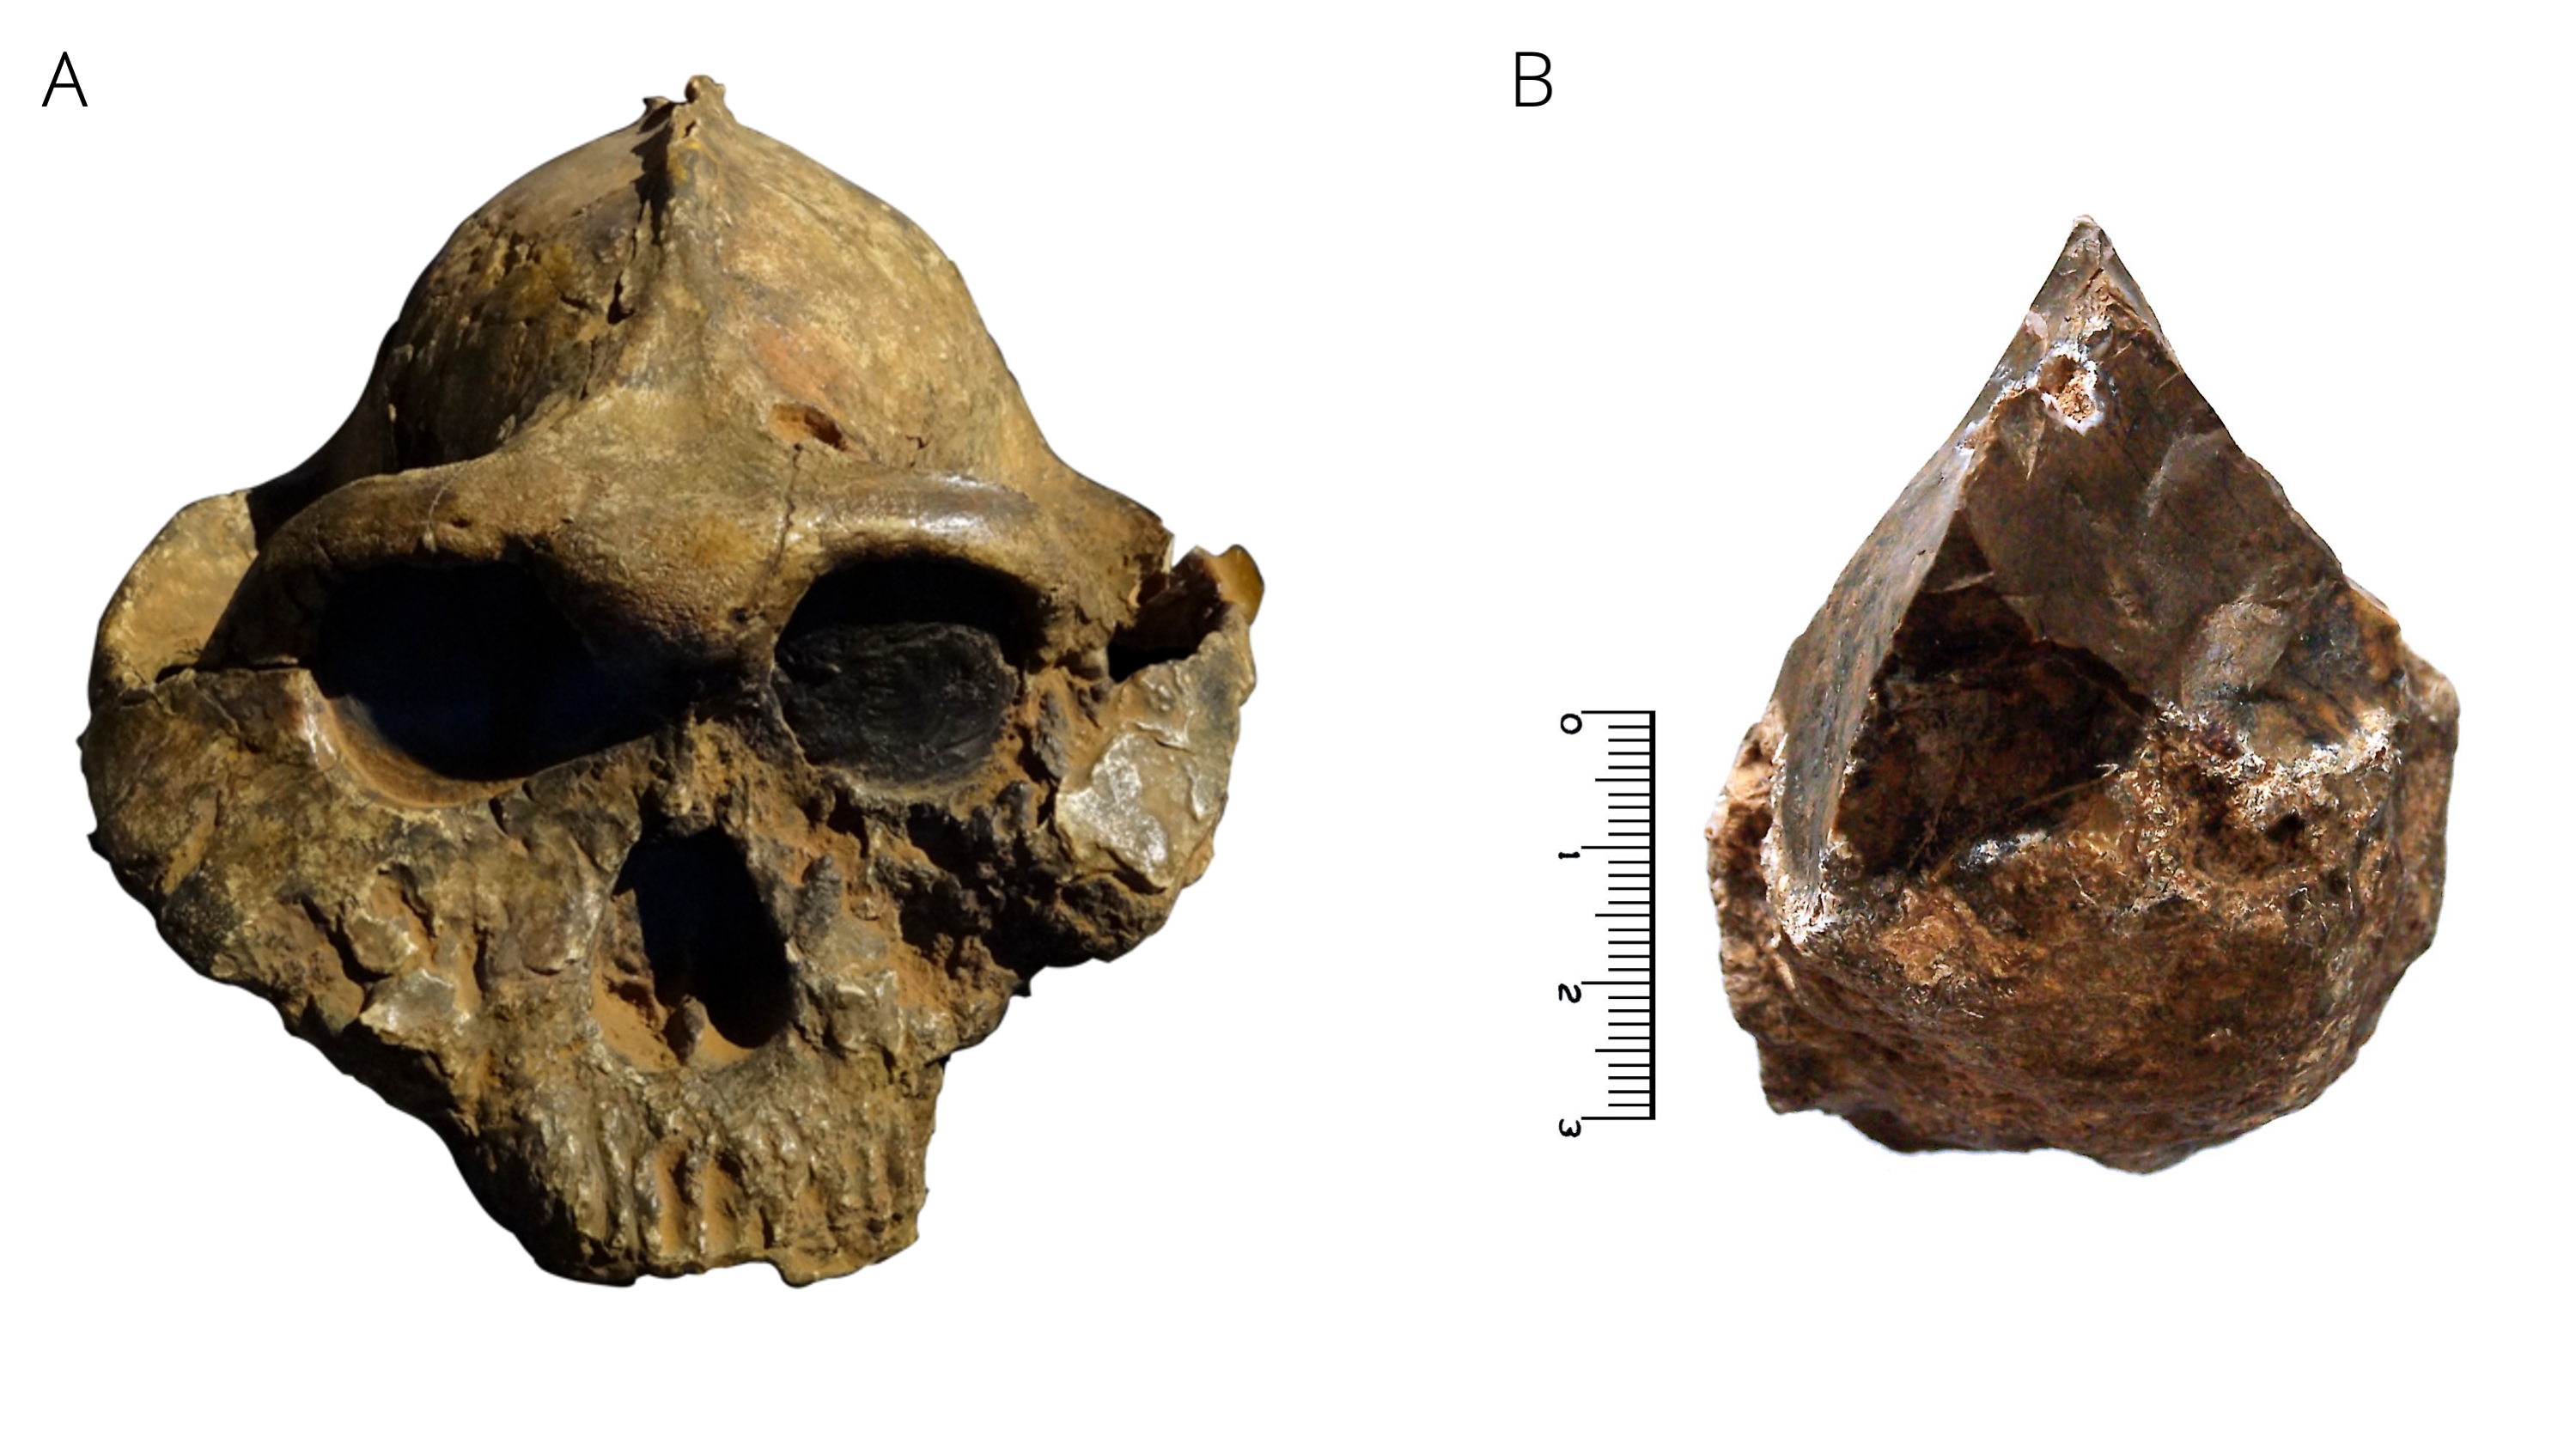 A. The skull of *Paranthropus boisei*, known as KNM ER 406, photographed at the Nairobi National Museum. Photo by Bjørn Christian Tørrissen, [CC BY-SA 3.0](https://creativecommons.org/licenses/by-sa/3.0). B. Oldowan stone chopper. Photo by José-Manuel Benito Álvarez, [CC BY-SA 2.5](https://creativecommons.org/licenses/by-sa/2.5).